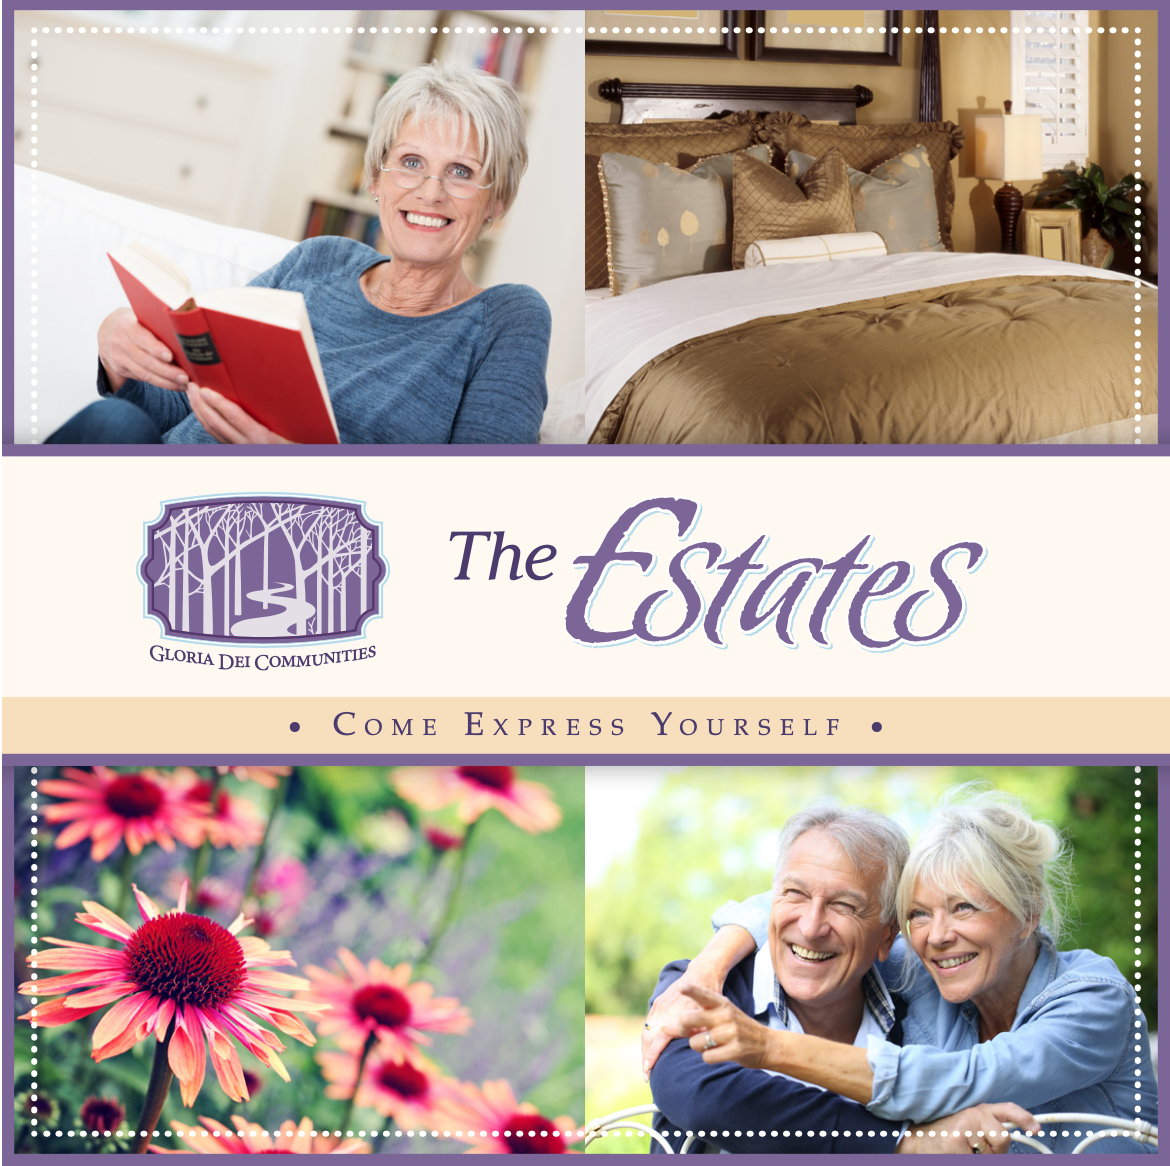 If you'd like to learn more about The Estates and what it has to offer you or a loved one, click here to download the PDF.